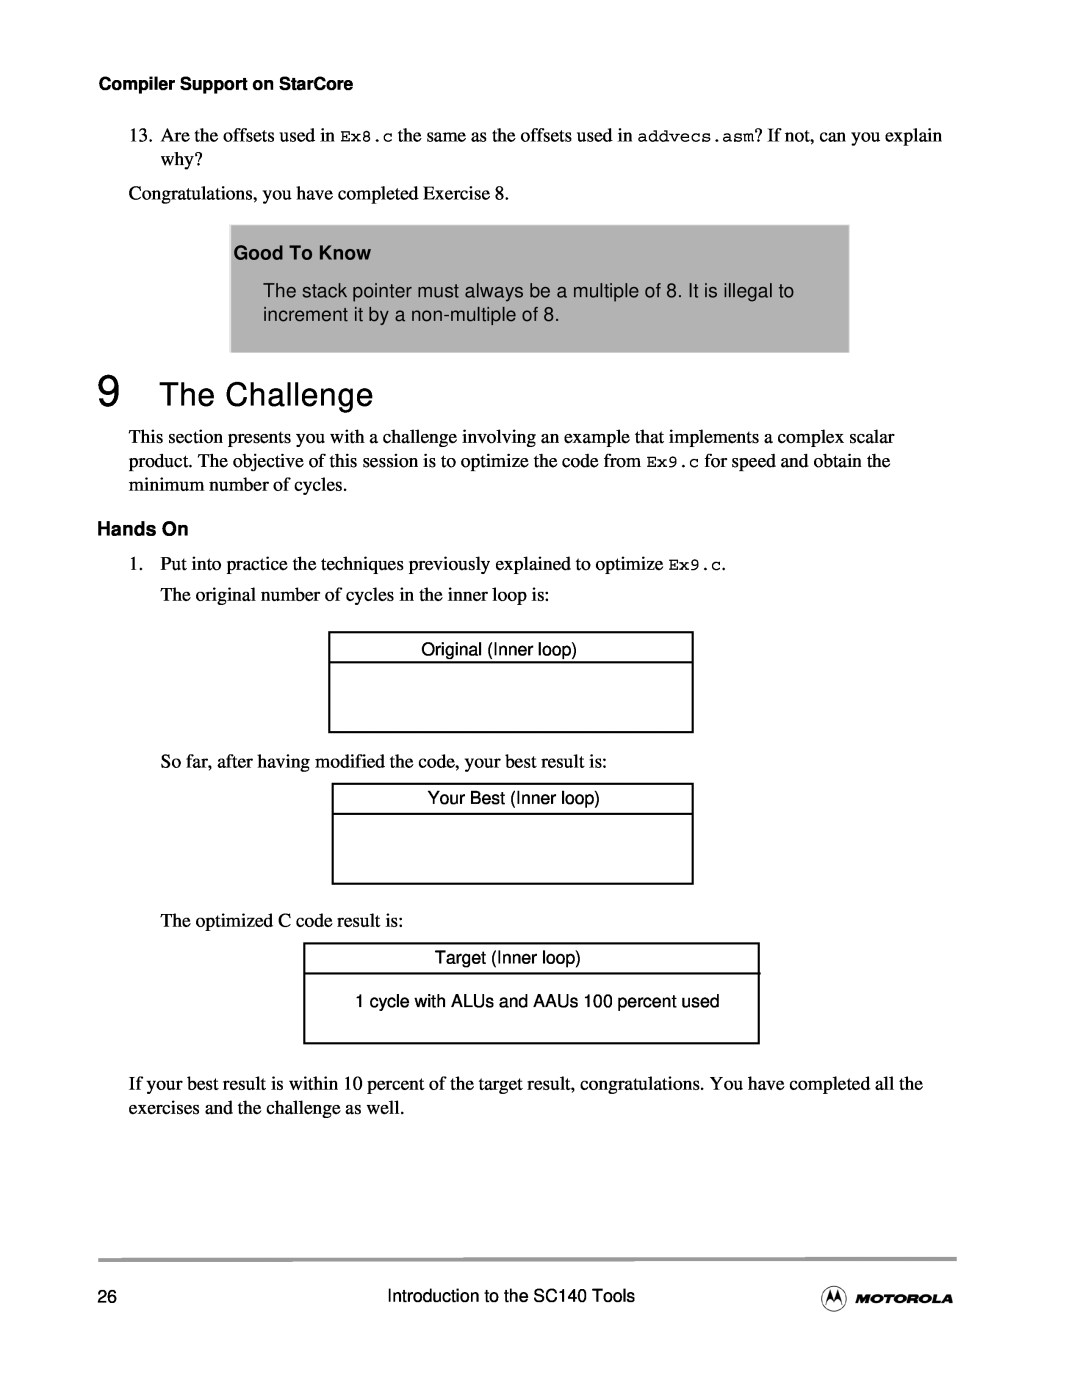 Motorola SC140 user manual The Challenge, Good To Know, Hands On 